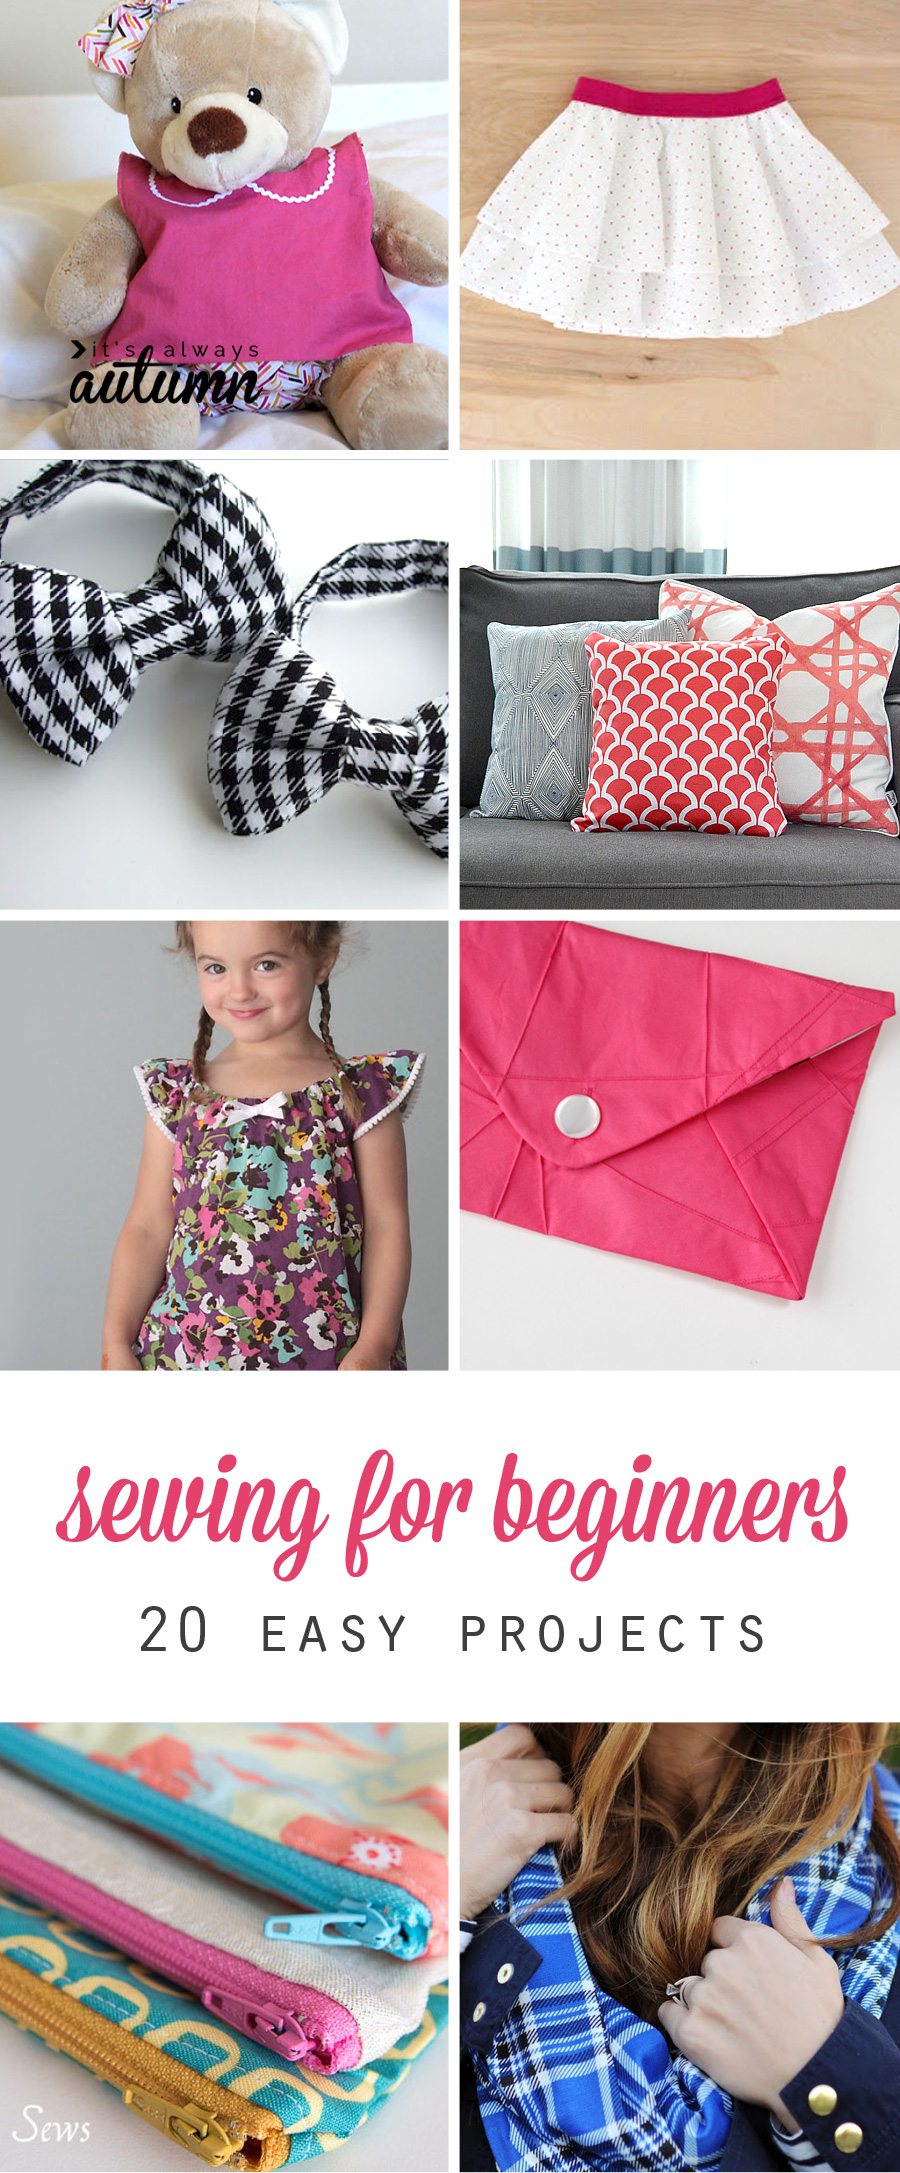 20-easy-beginner-sewing-projects-that-turn-out-super-cute-it-s